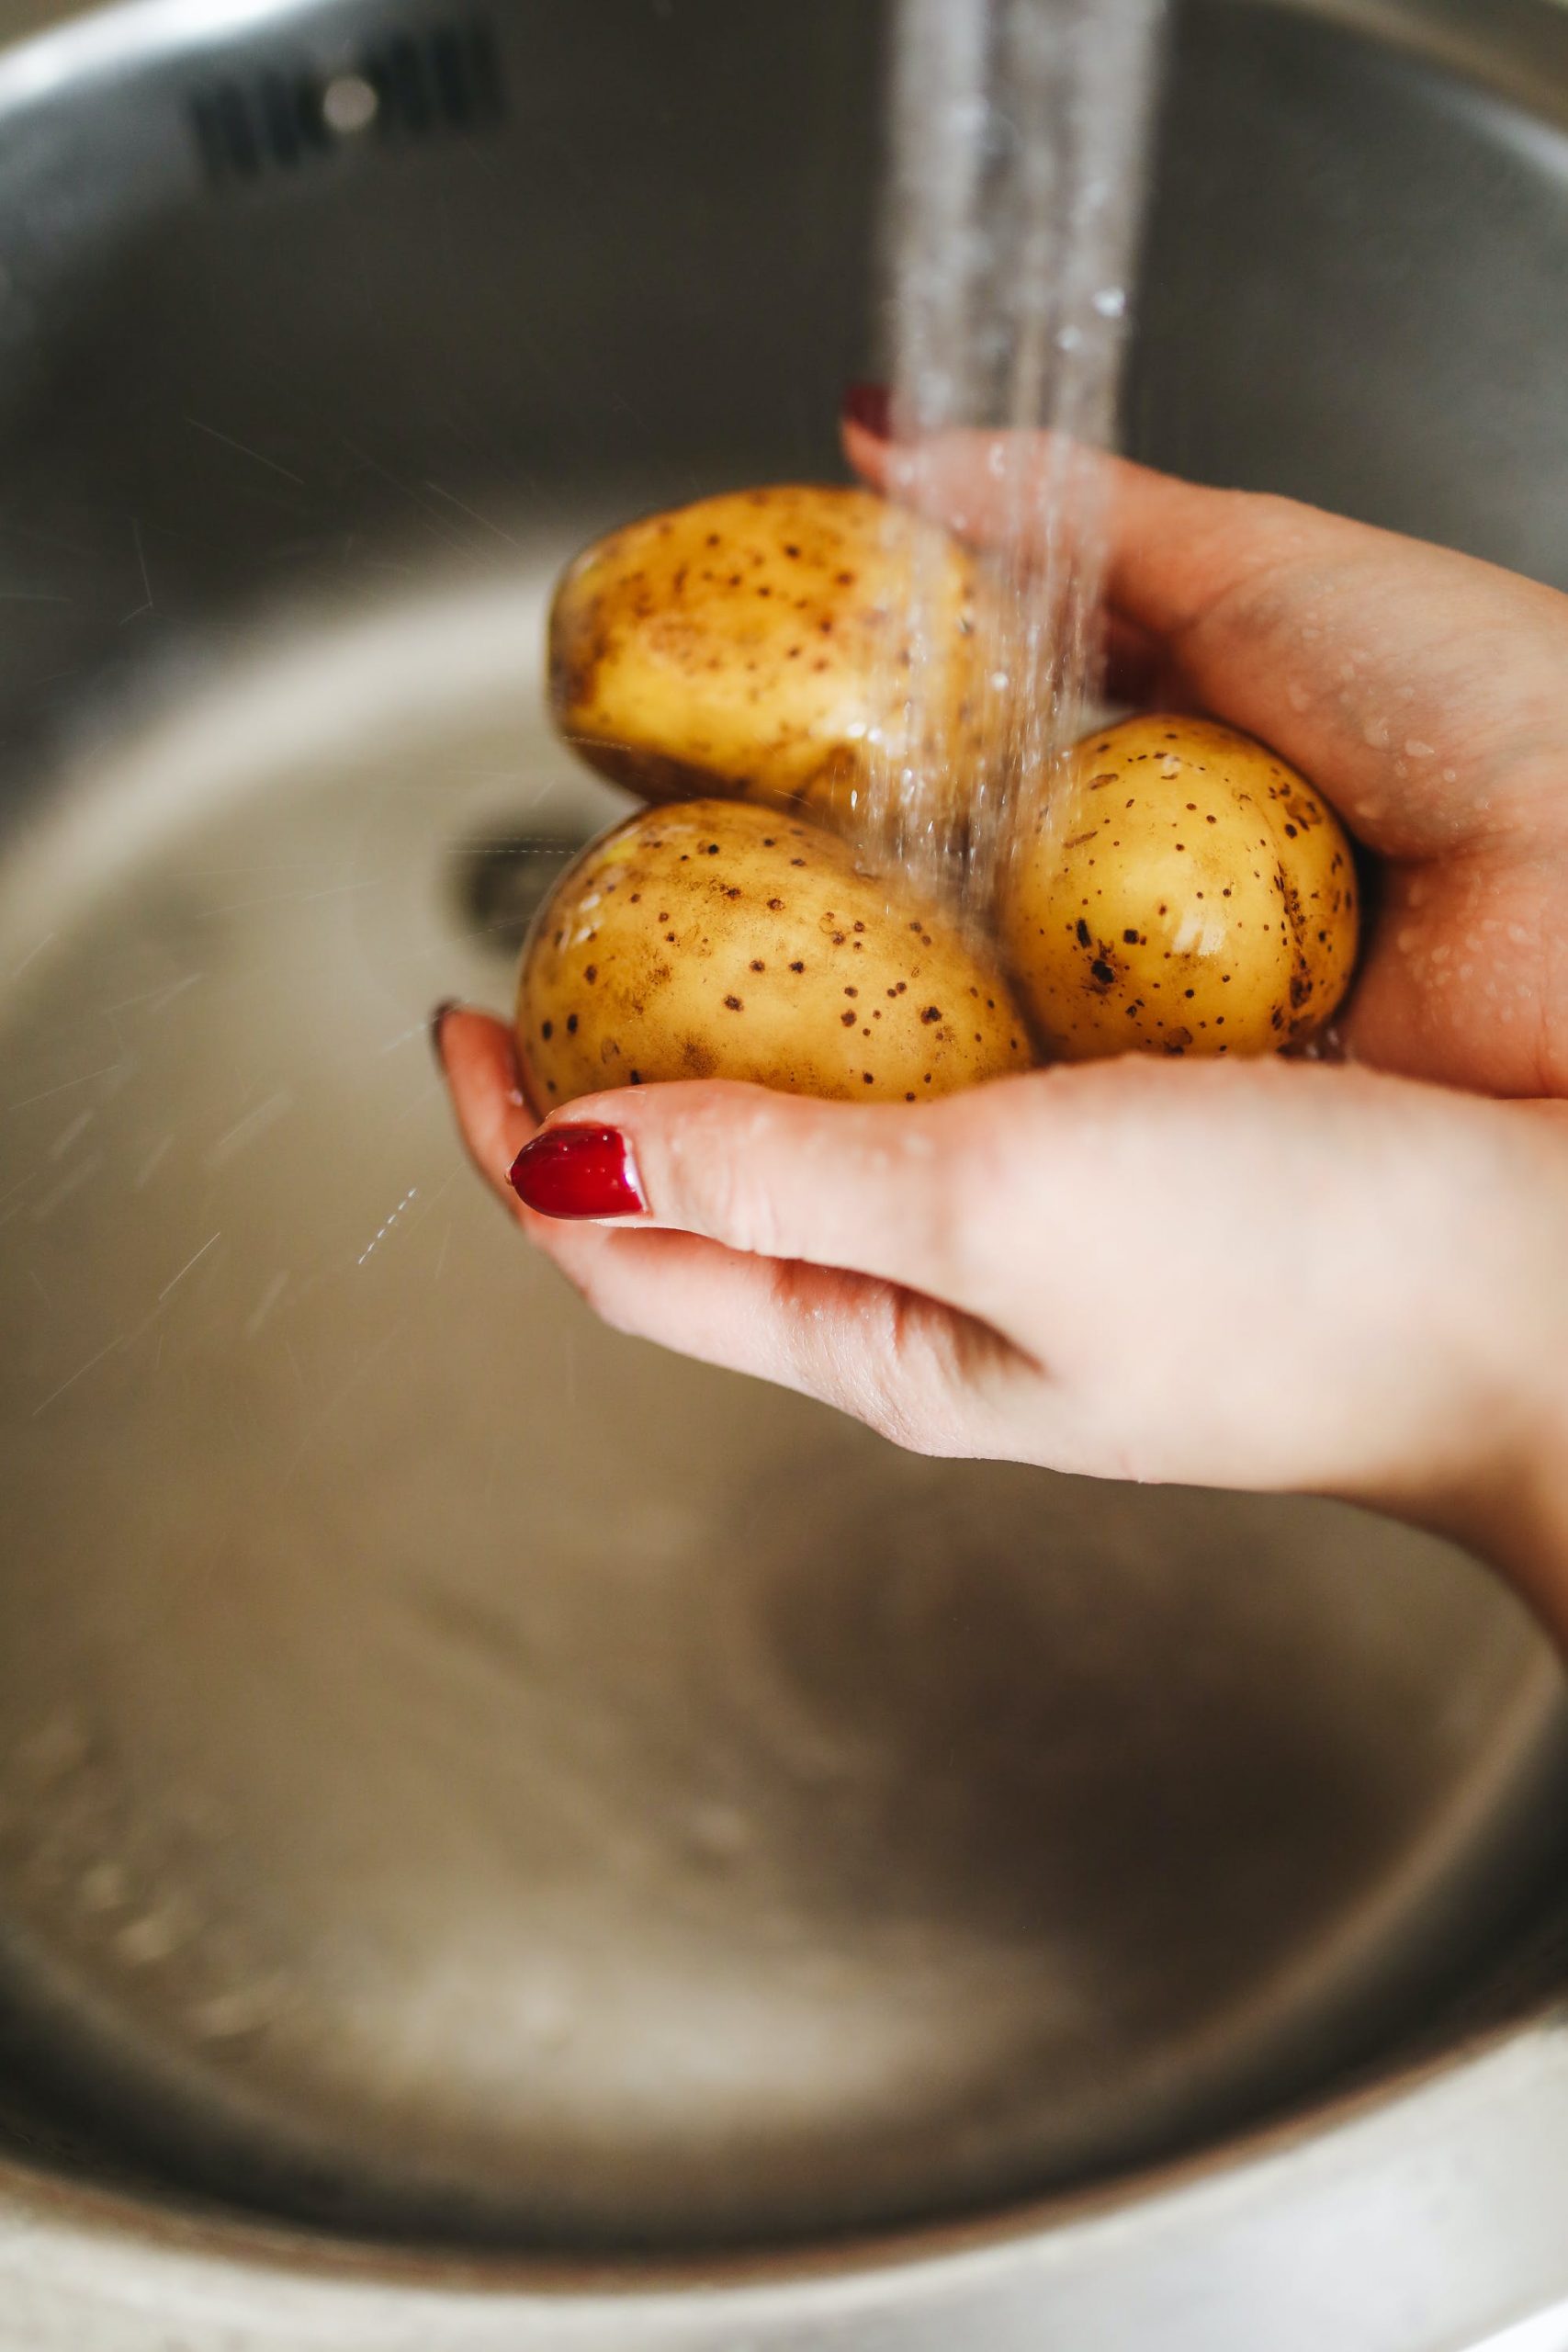 rinse your potatoes